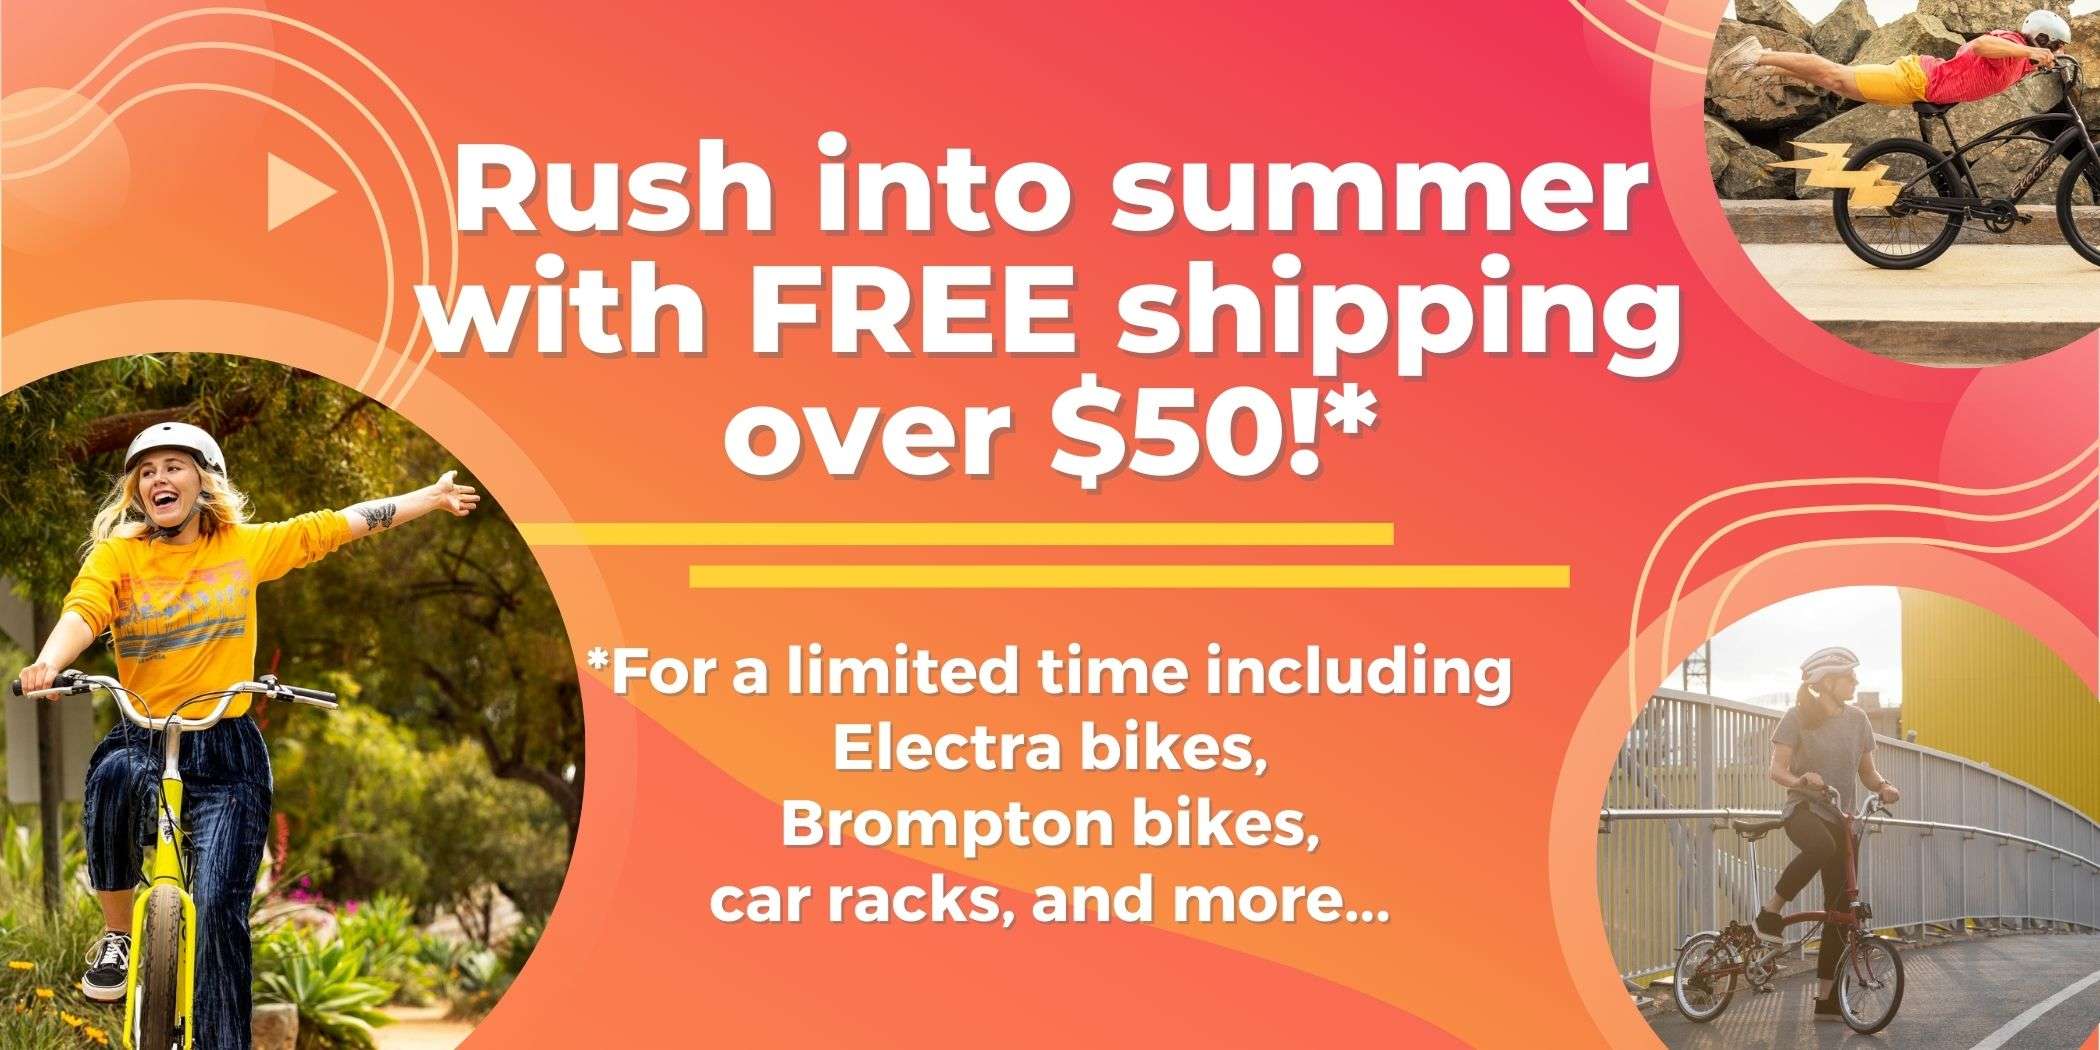 FREE shipping over $50!*